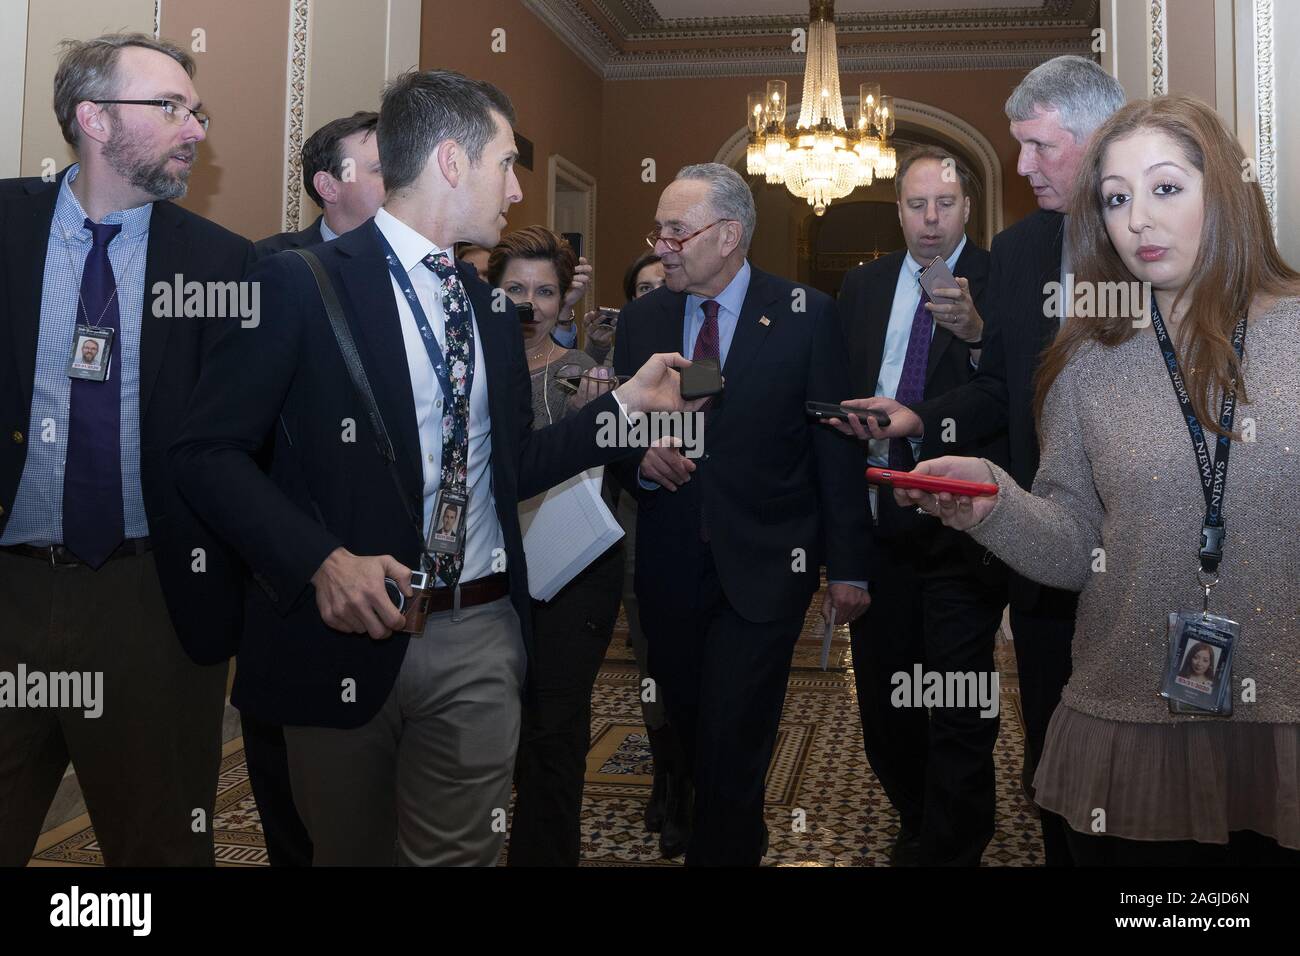 Washington, District of Columbia, USA. 19th Dec, 2019. United States Senate Minority Leader Chuck Schumer (Democrat of New York) speaks to members of the media after leaving a meeting with Speaker of the United States House of Representatives Nancy Pelosi (Democrat of California) in her office on Capitol Hill in Washington, DC, U.S., on Thursday, December 19, 2019. Last night, the United States House of Representatives approved two articles of impeachment against United States President Donald J. Trump. Credit: Stefani Reynolds/CNP/ZUMA Wire/Alamy Live News Stock Photo